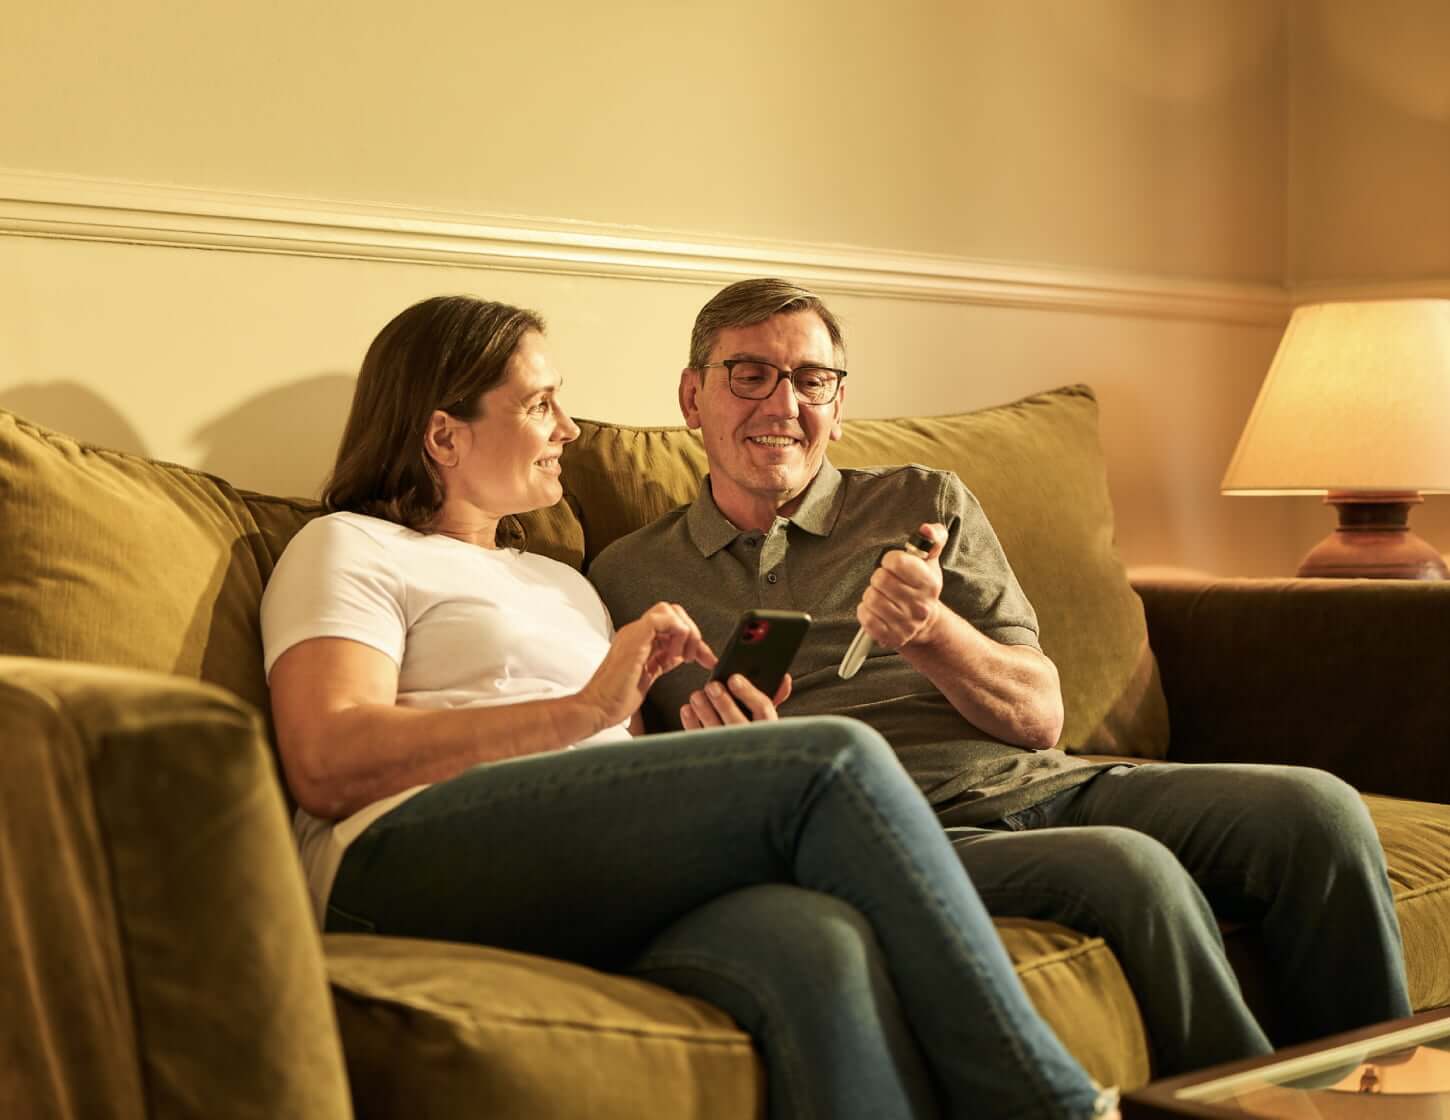 A middle-aged man and woman sit on their couch; the woman holds a smartphone while the man looks at a Tempo Pen with Tempo Smart Button attached.